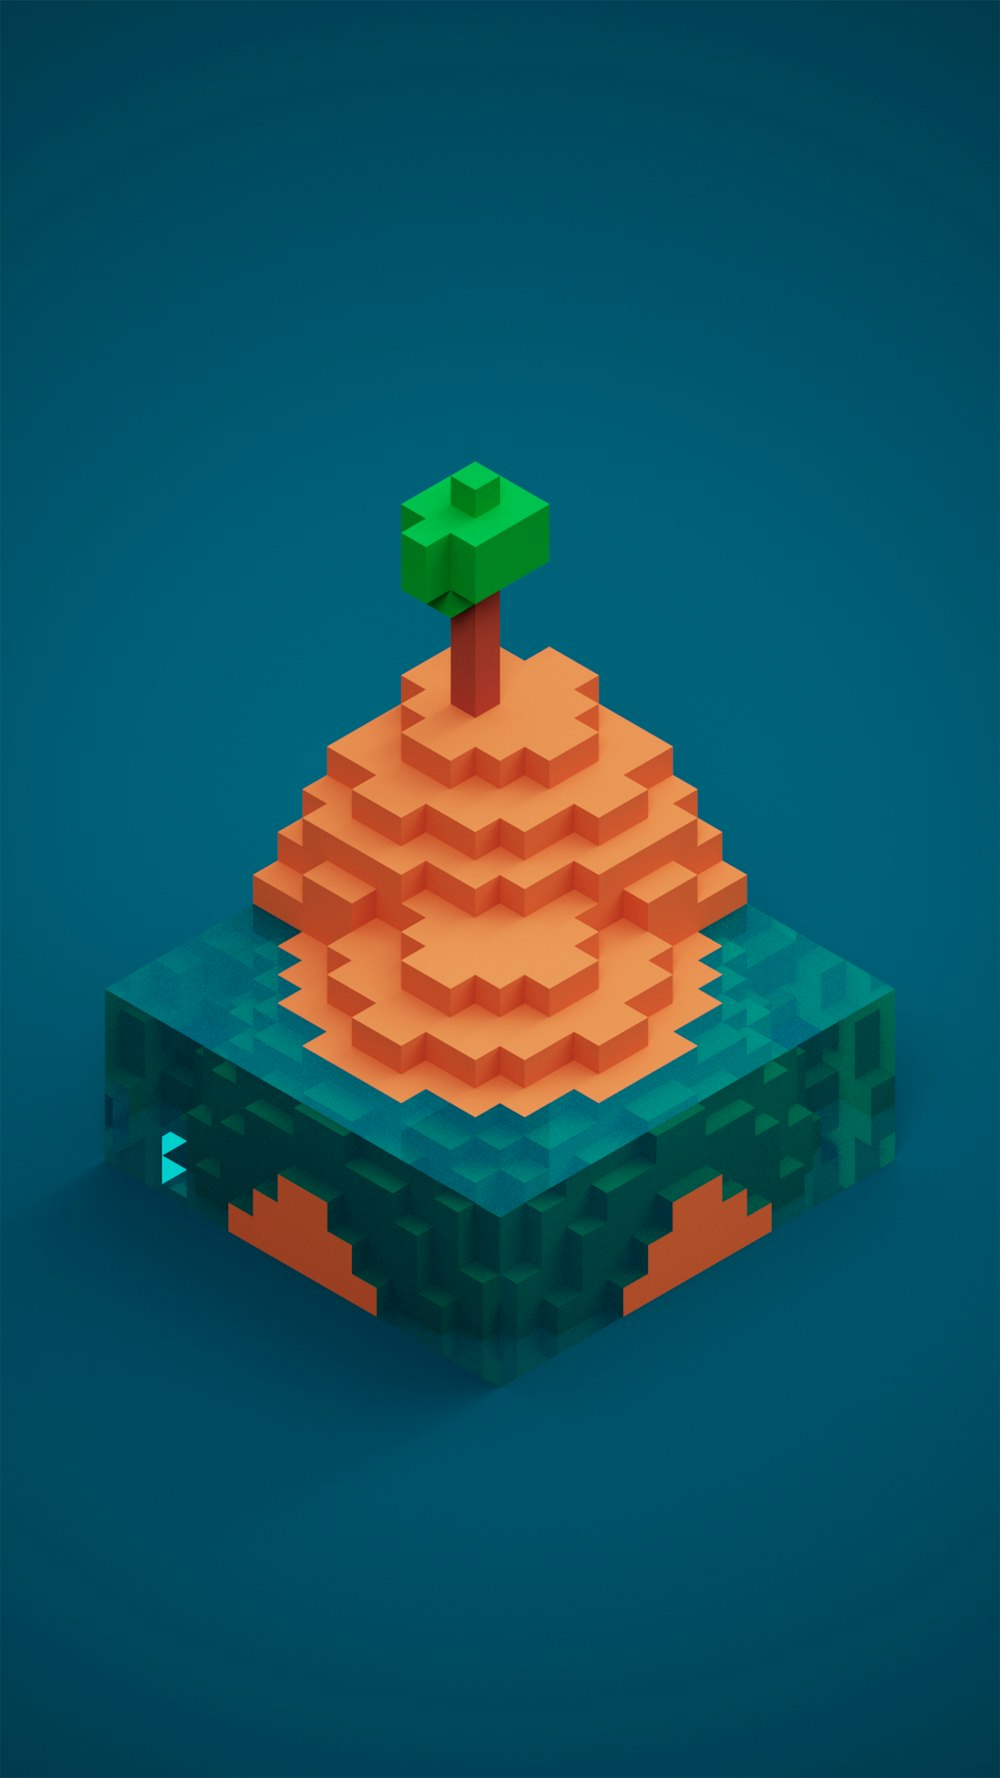 a low polygonal image of an island with a tree on top